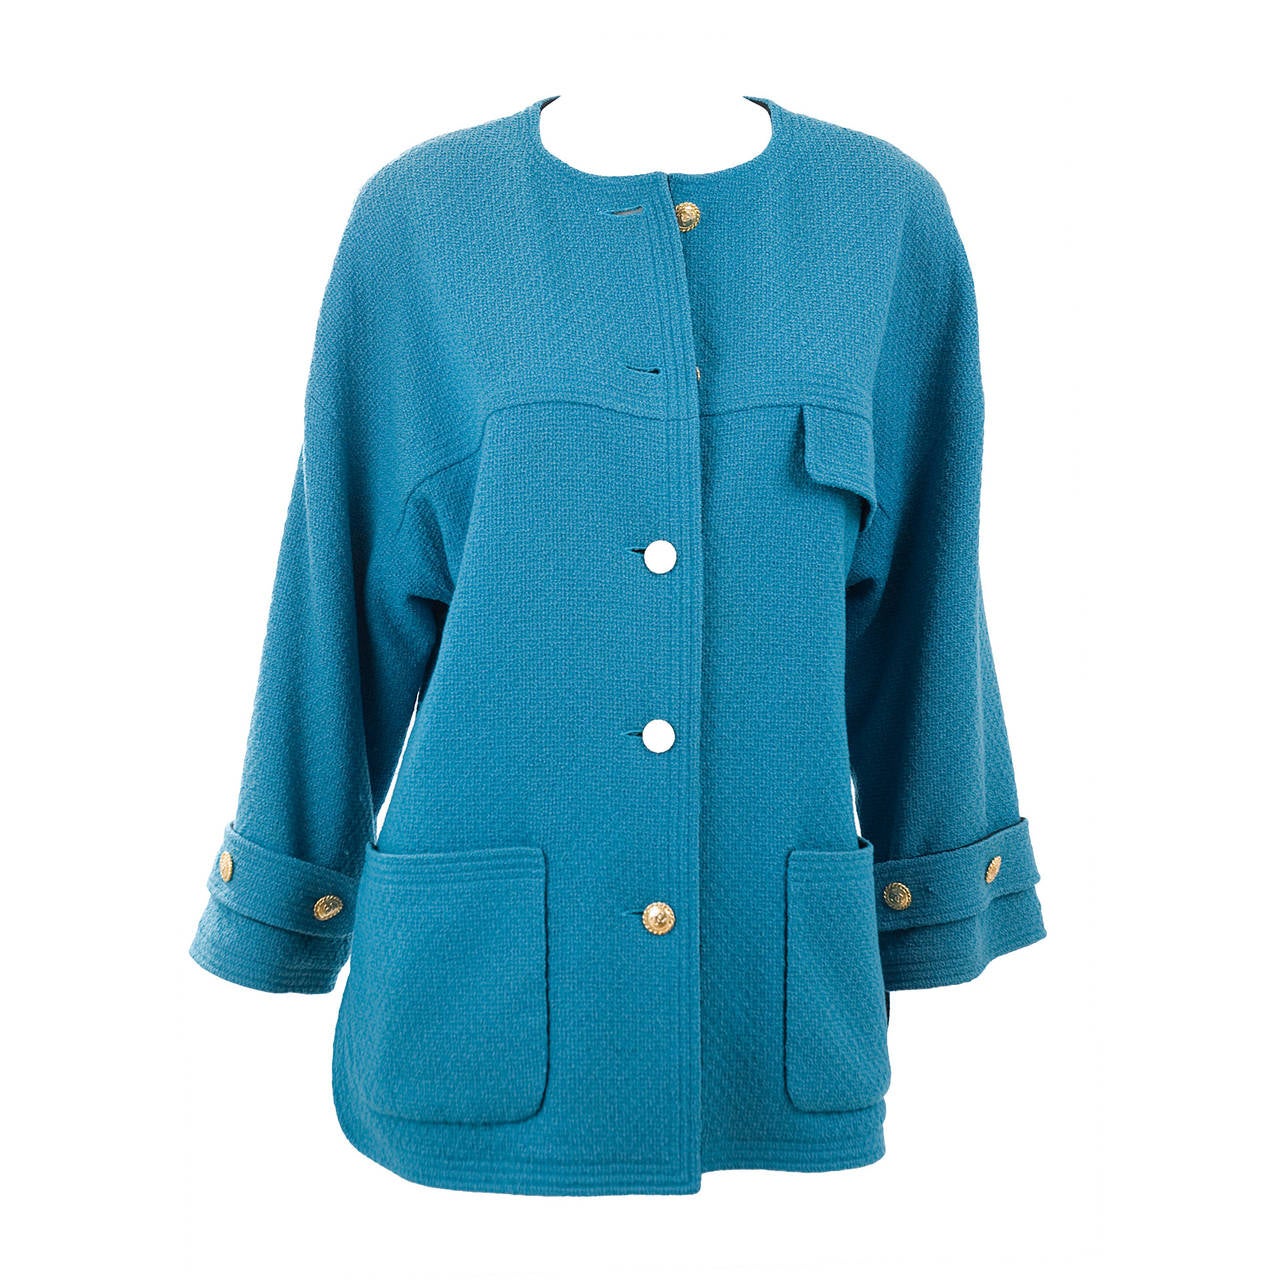 Chanel Jacket in Teal